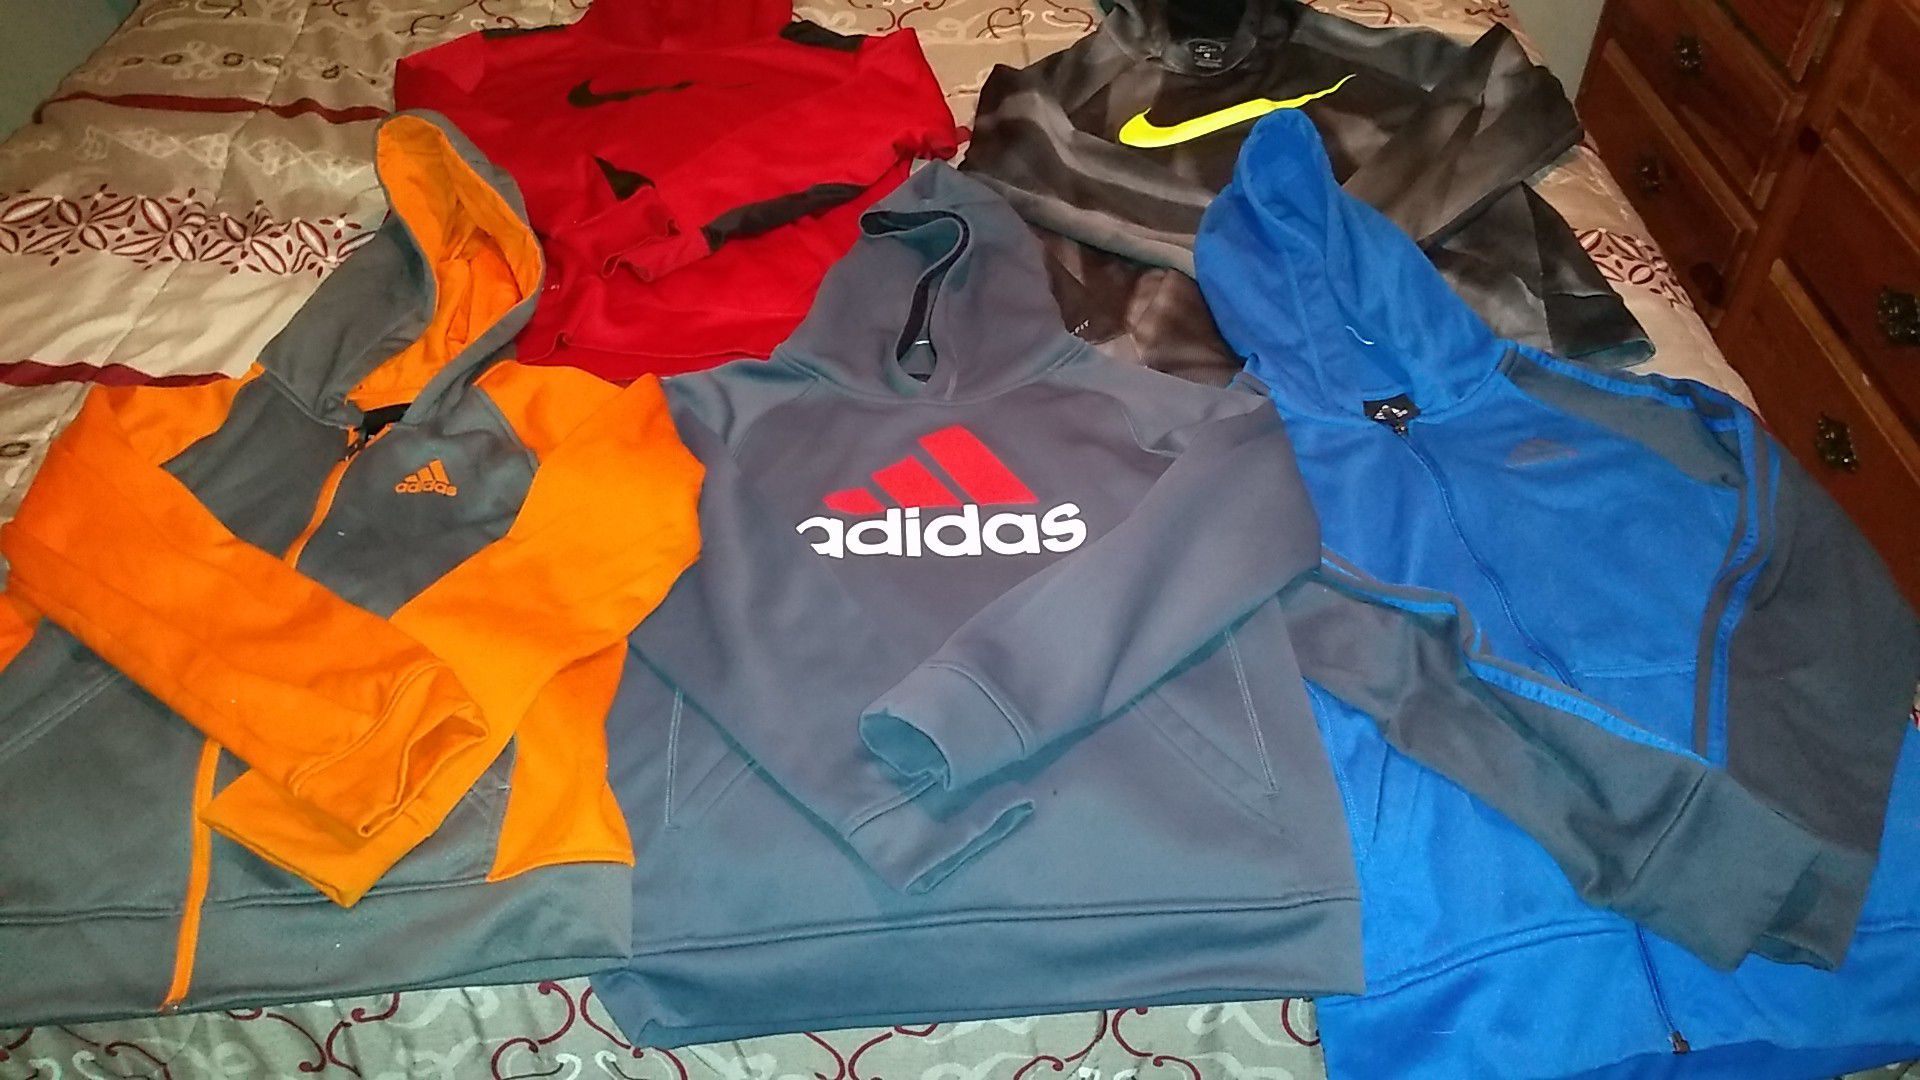 2 NIKE,( 1 therma fit ) , ( 1 dry fit) hoodies. Size XL , TG , EG. 3 Adidas hoodies. Size XL